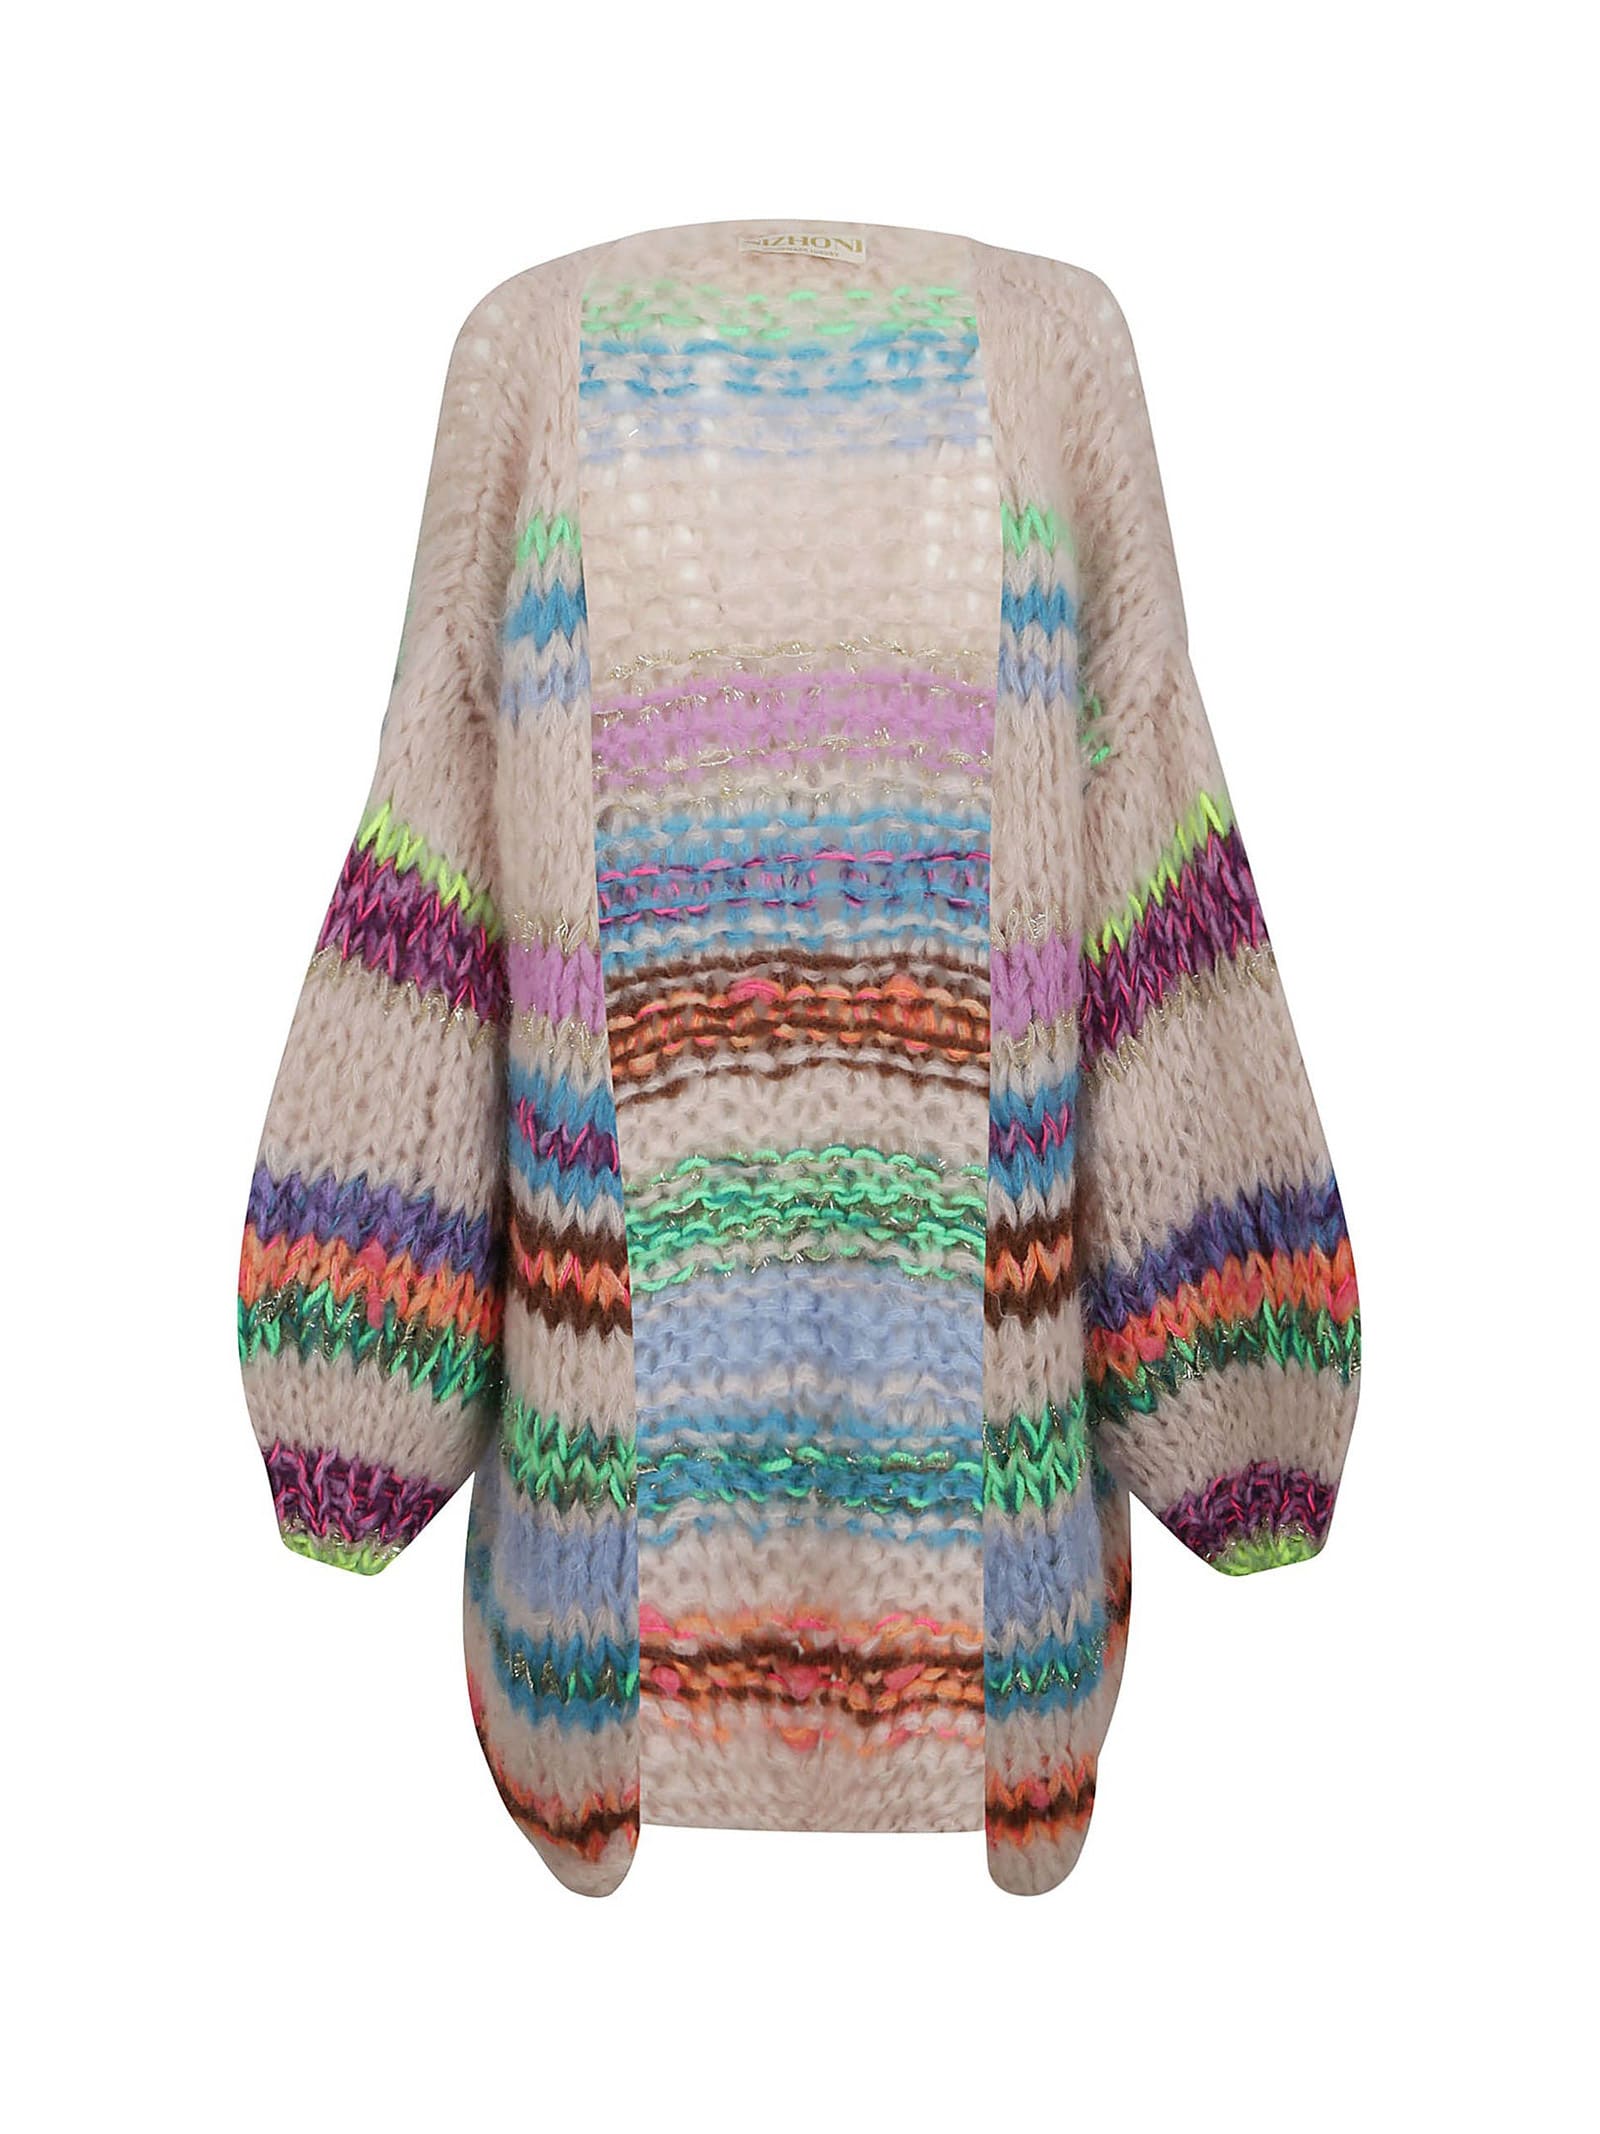 NIZHONI LONG HAND-KNITTED MULTICOLOR STRIPED CARDIGAN